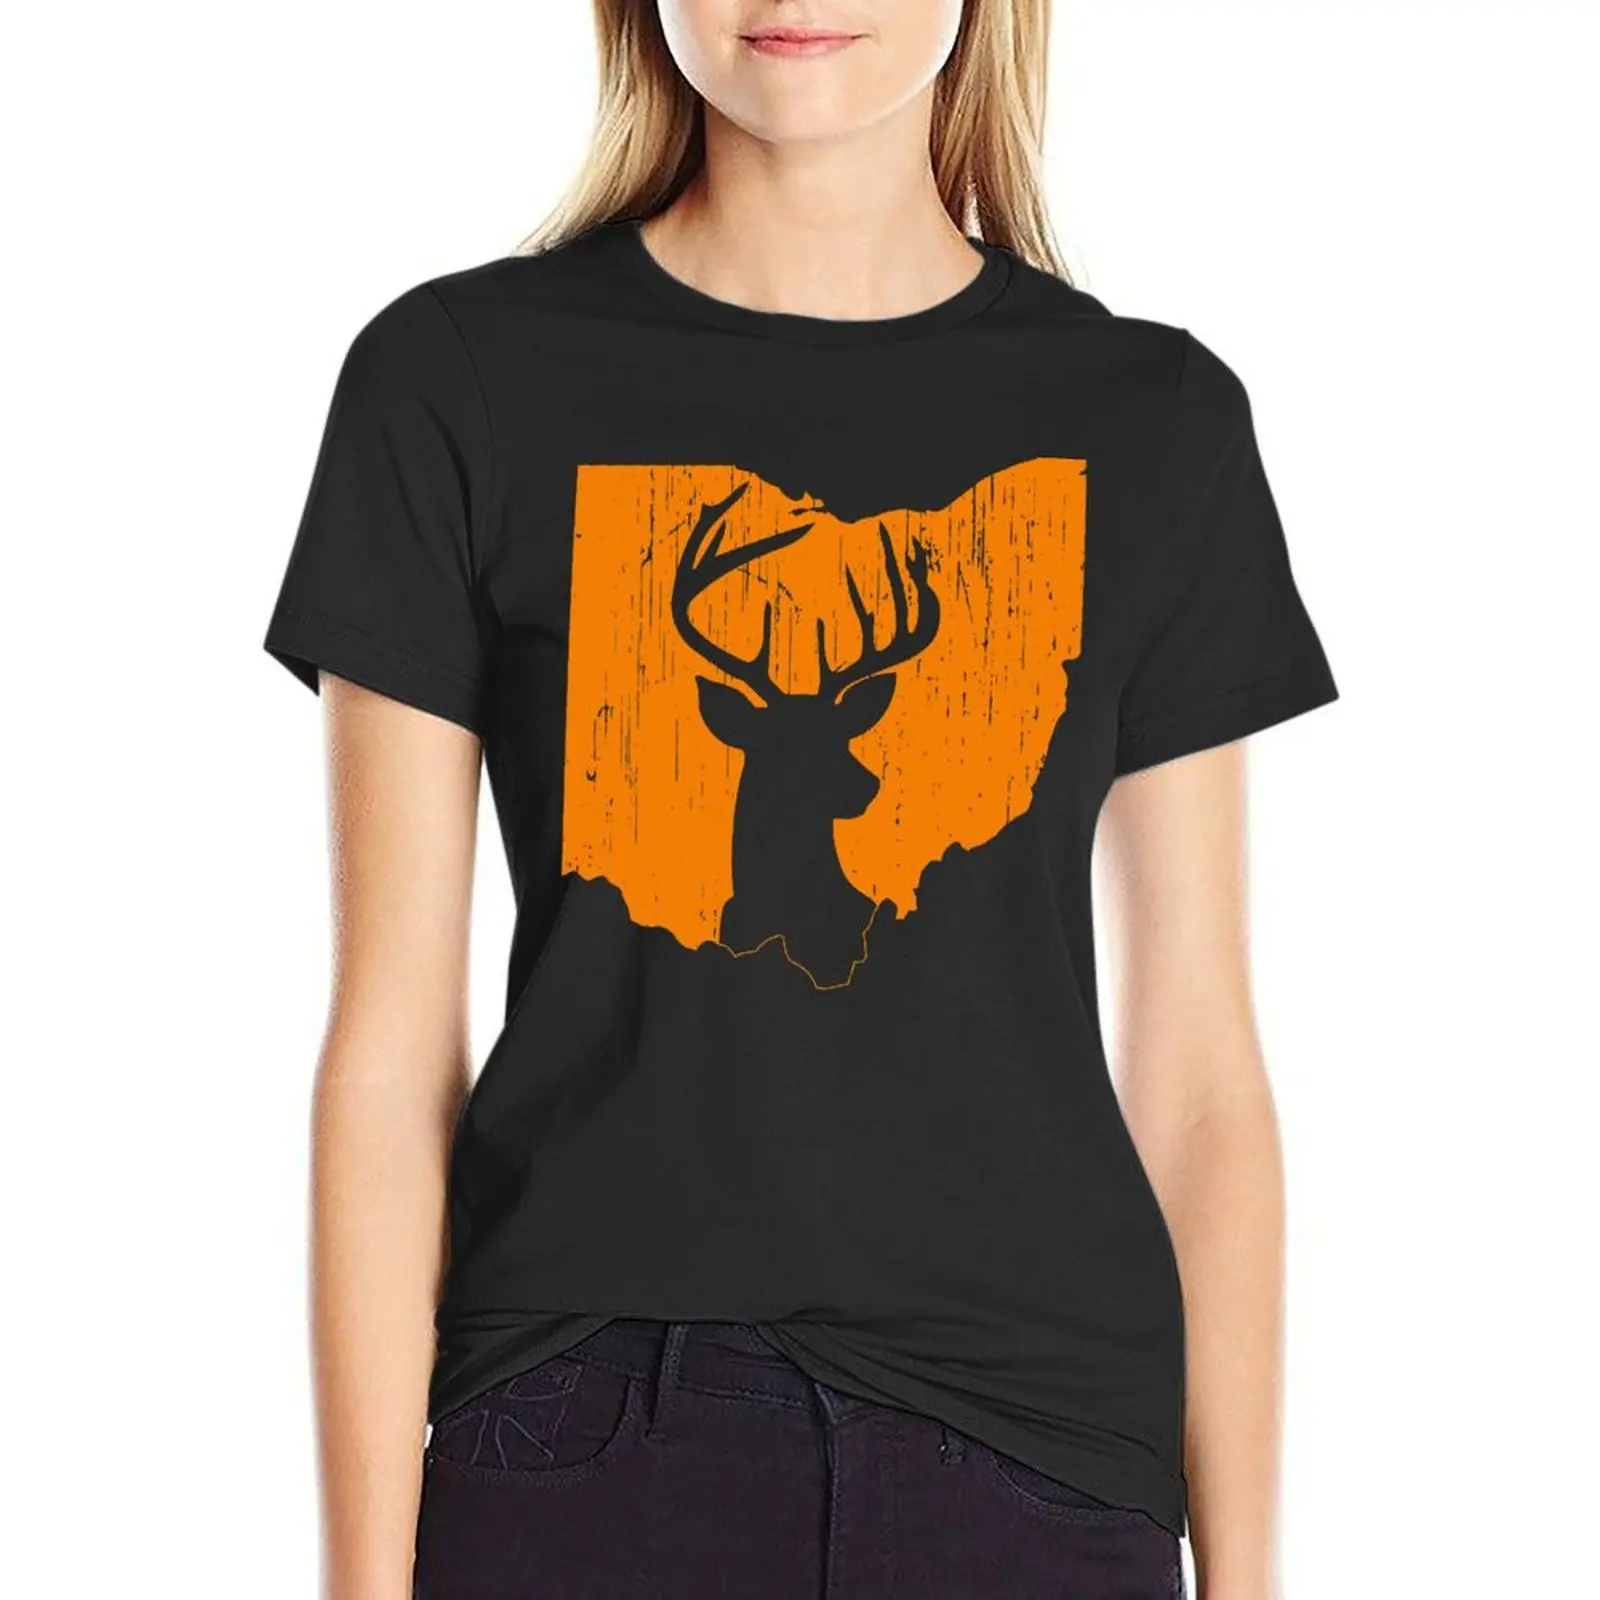 

Ohio Deer Hunting T-shirt animal print shirt for girls hippie clothes tops t-shirts for Women loose fit